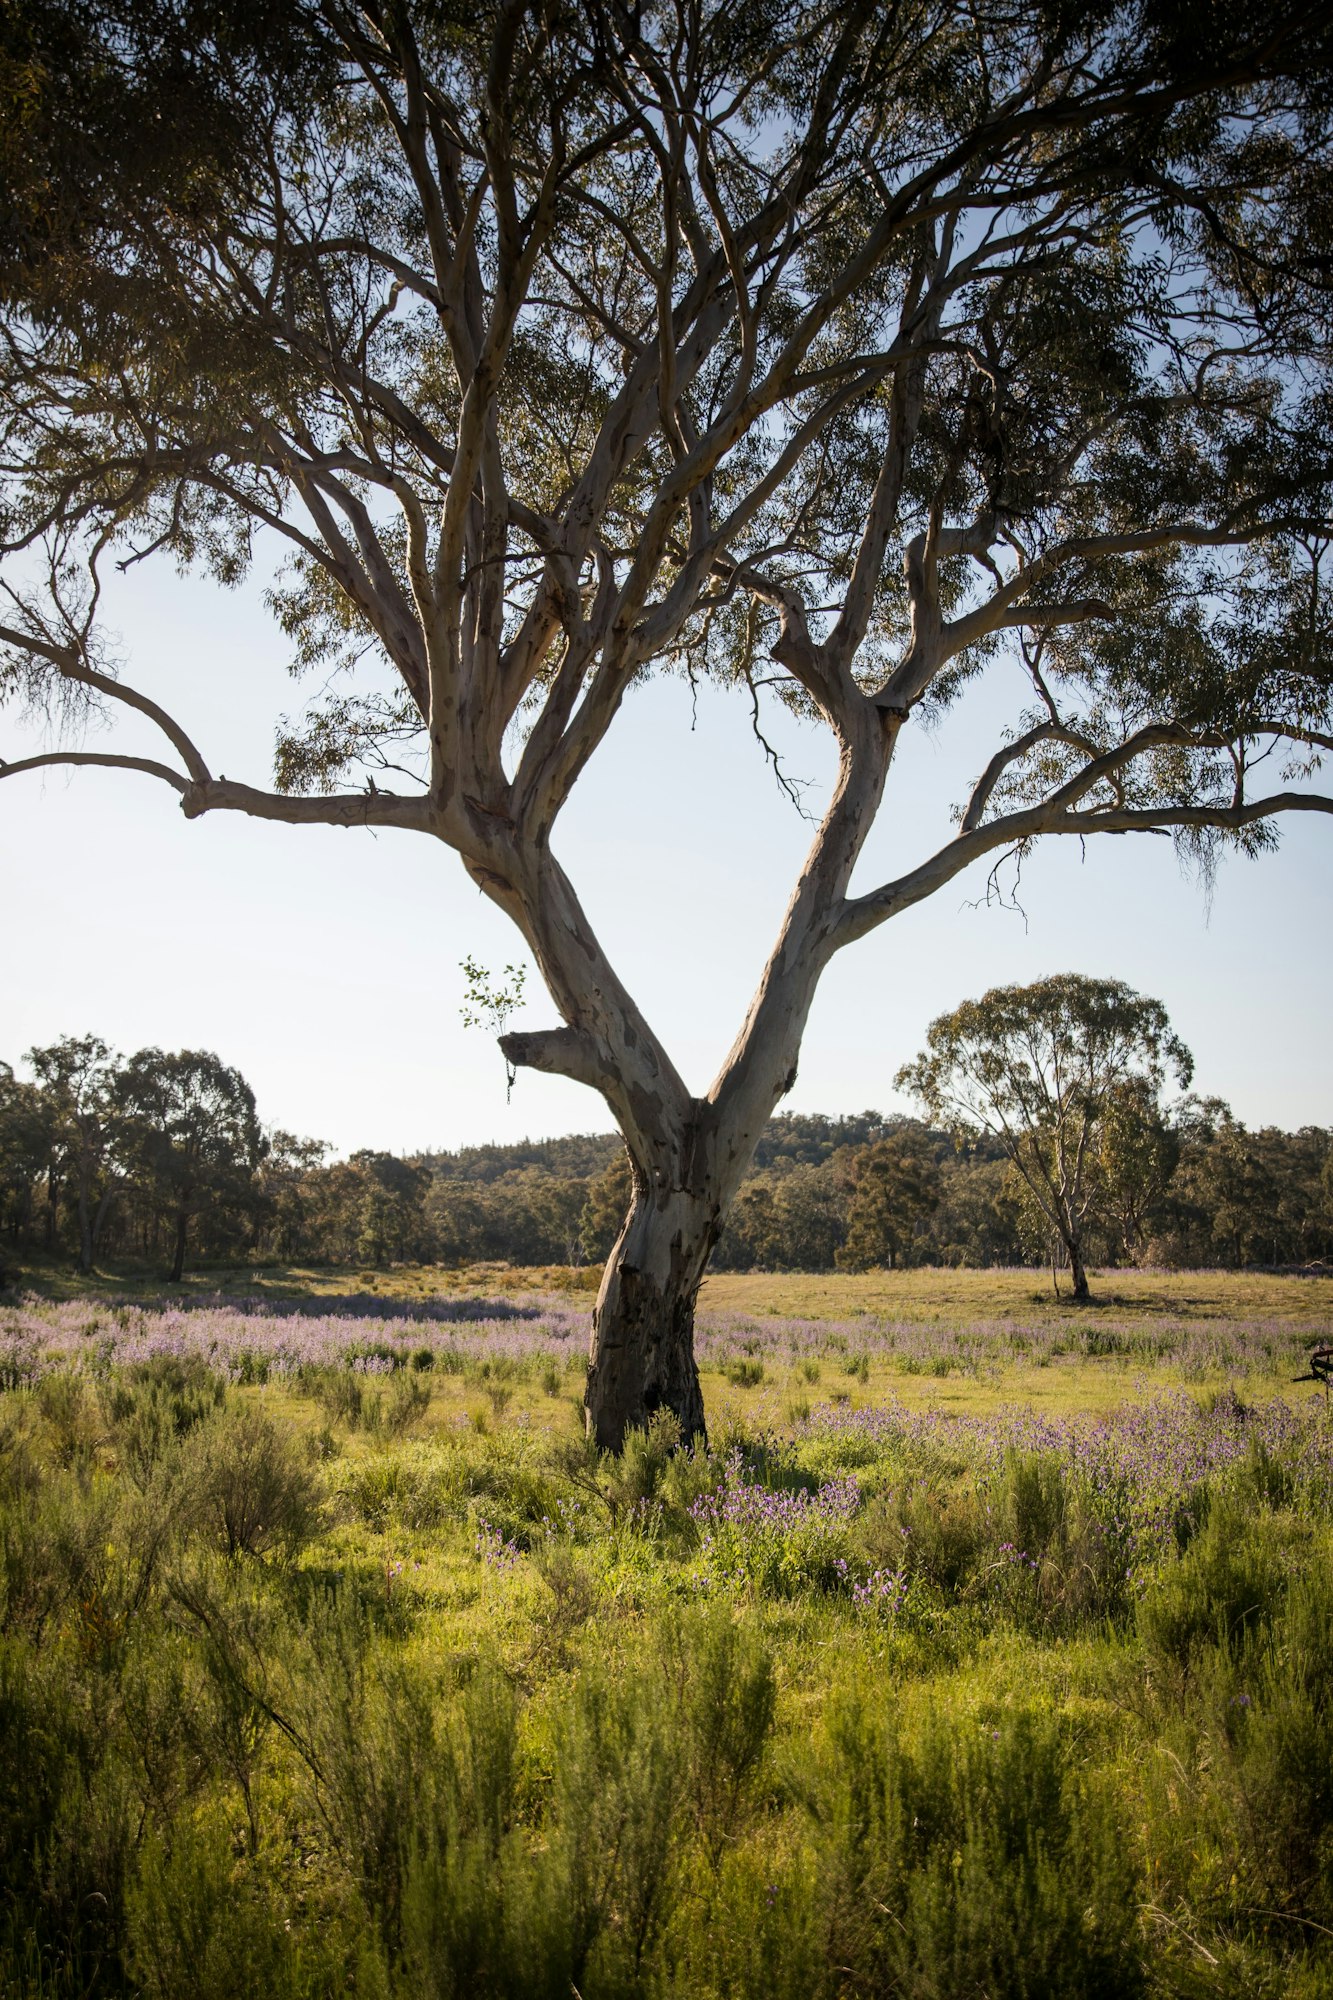 A field of purple flowers at sunset with gum tree in the outback Australia